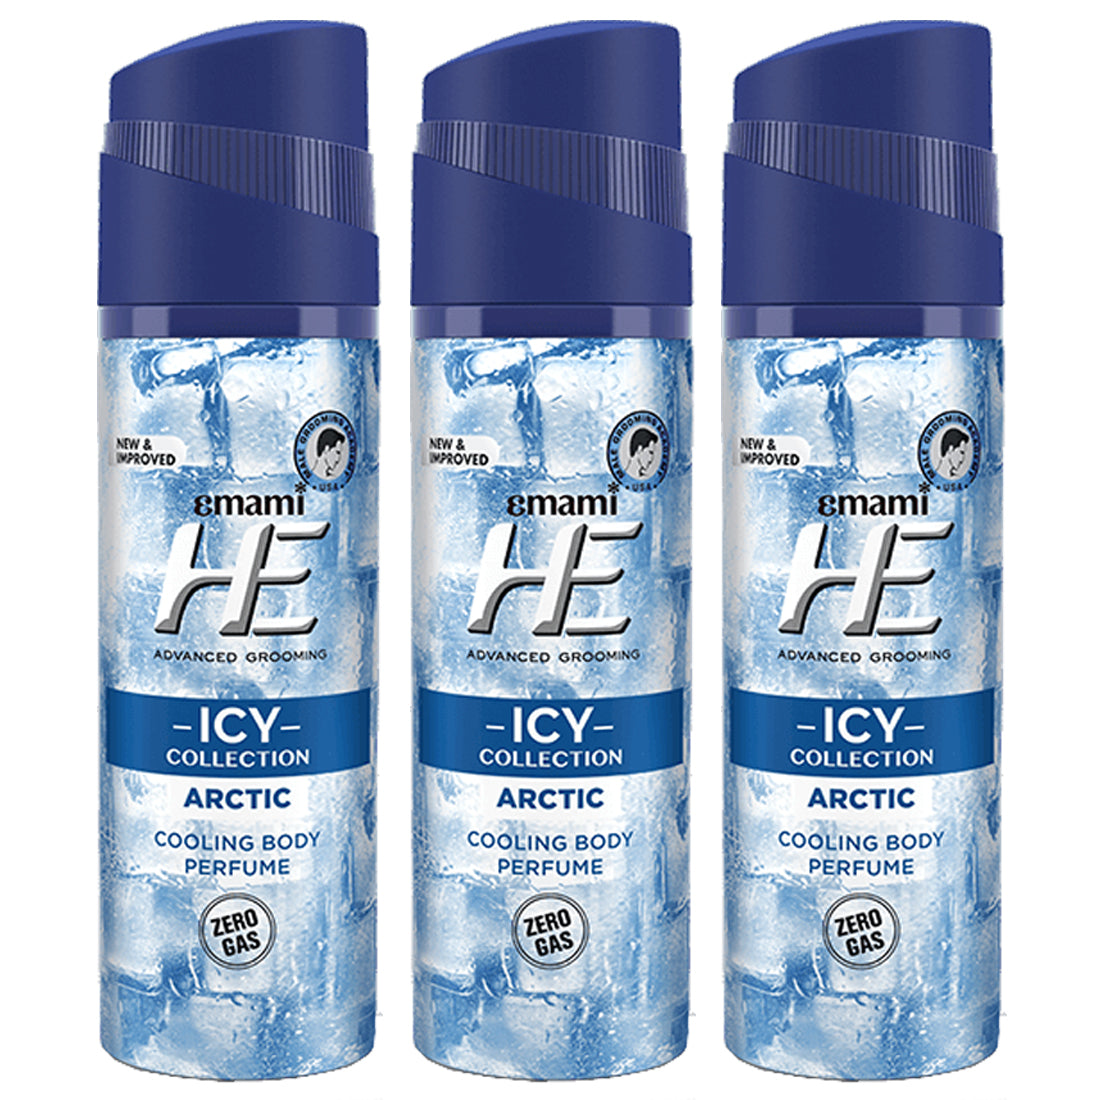 Emami HE ICY Collection Arctic Cooling Body Perfume 120ml Pack Of 3